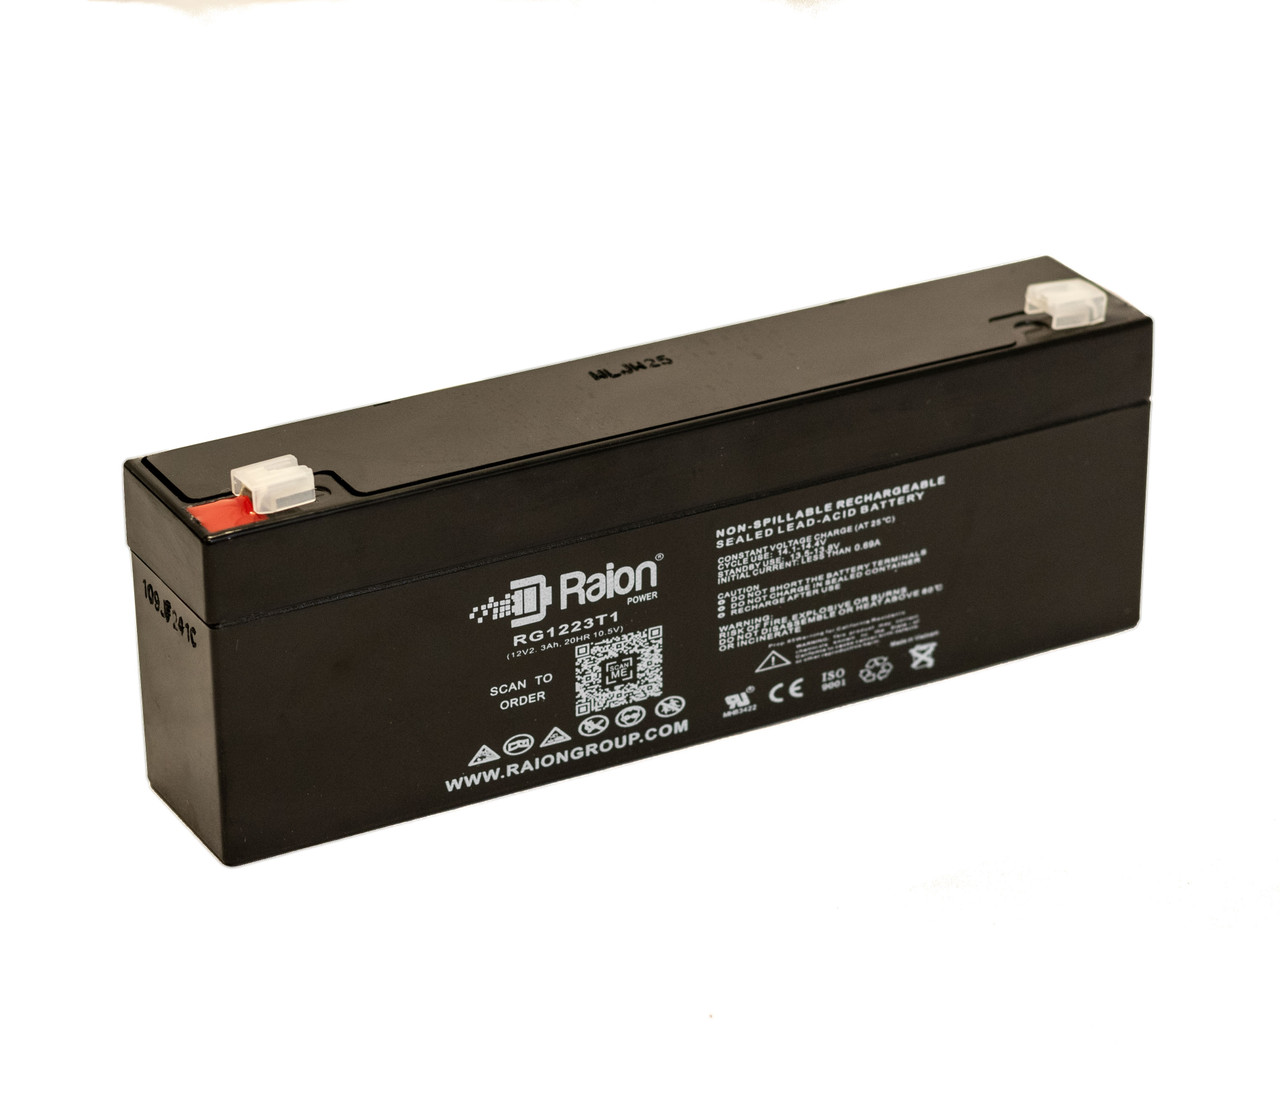 Raion Power RG1223T1 Replacement Battery for Picker International Pulsar 4 Monitor